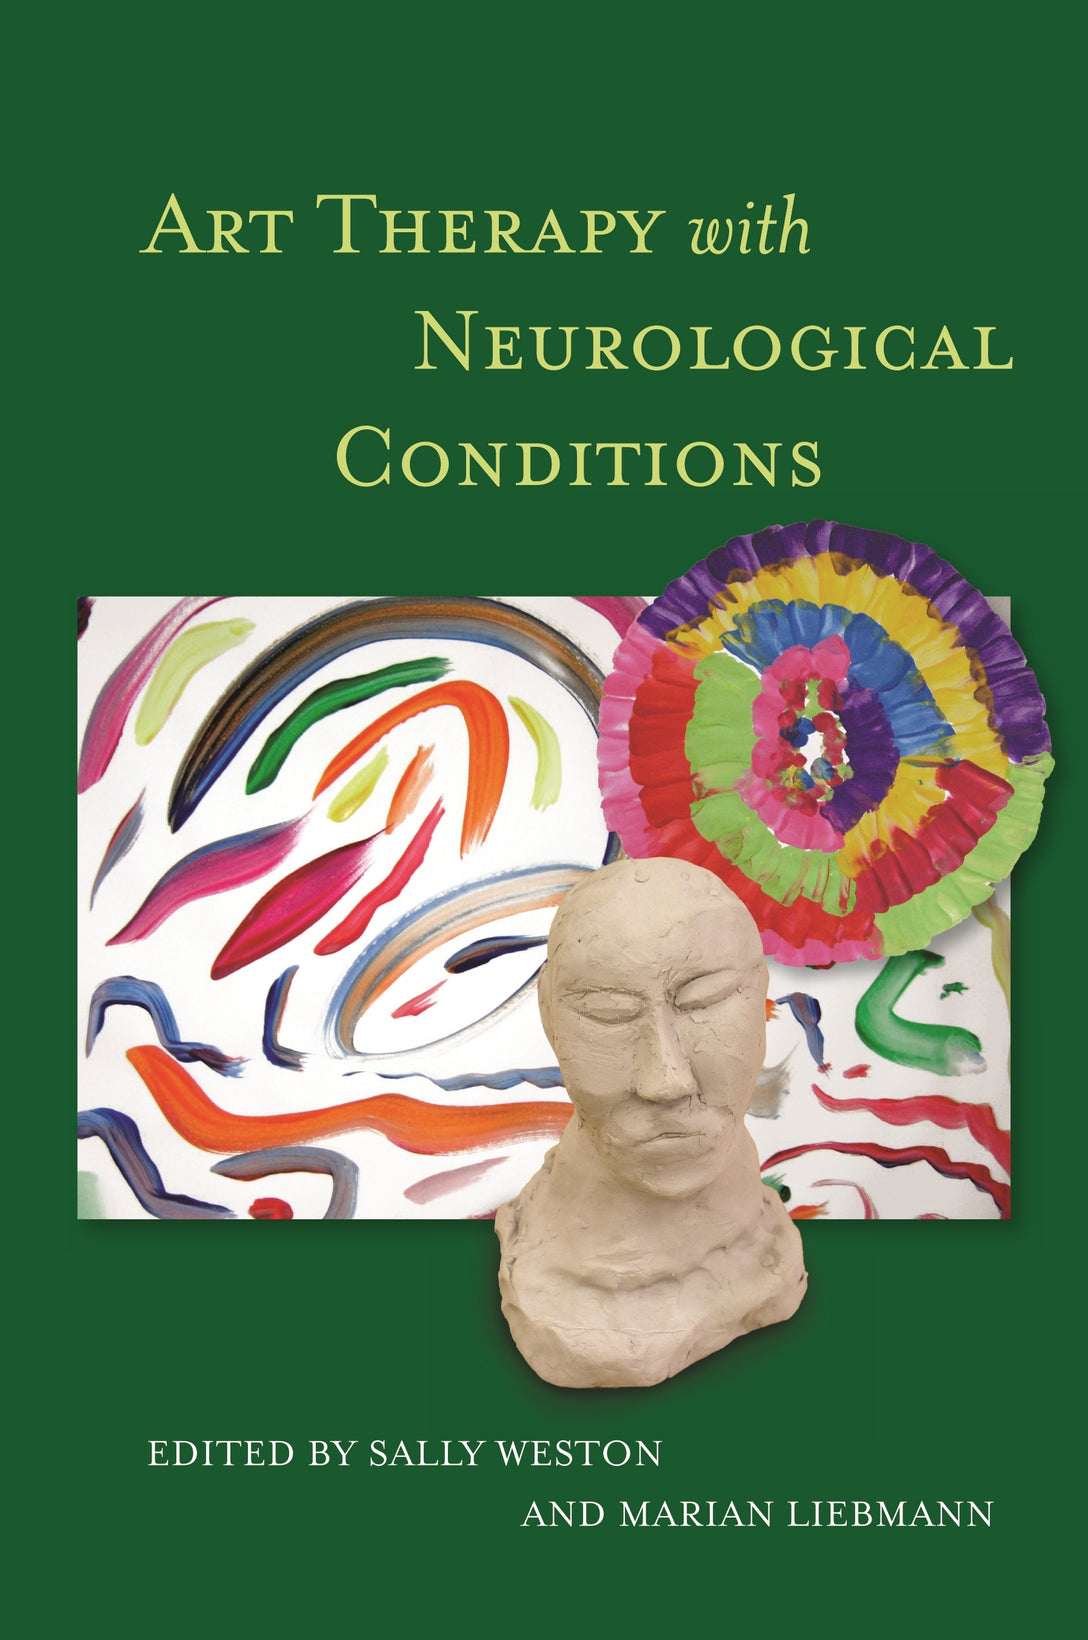 Art Therapy with Neurological Conditions by No Author Listed, Sally Weston, Marian Liebmann, Jackie Ashley